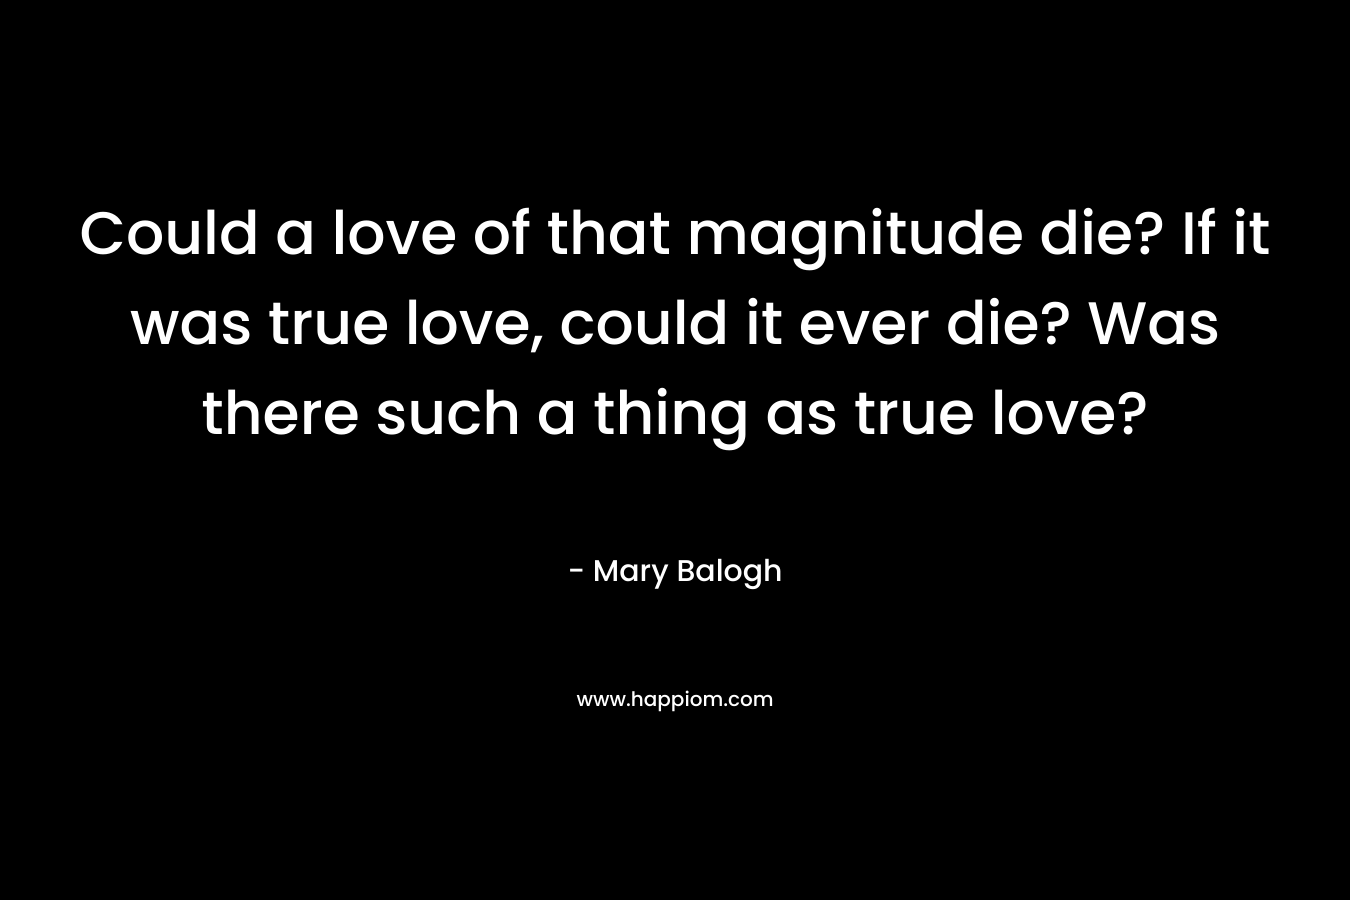 Could a love of that magnitude die? If it was true love, could it ever die? Was there such a thing as true love? – Mary Balogh